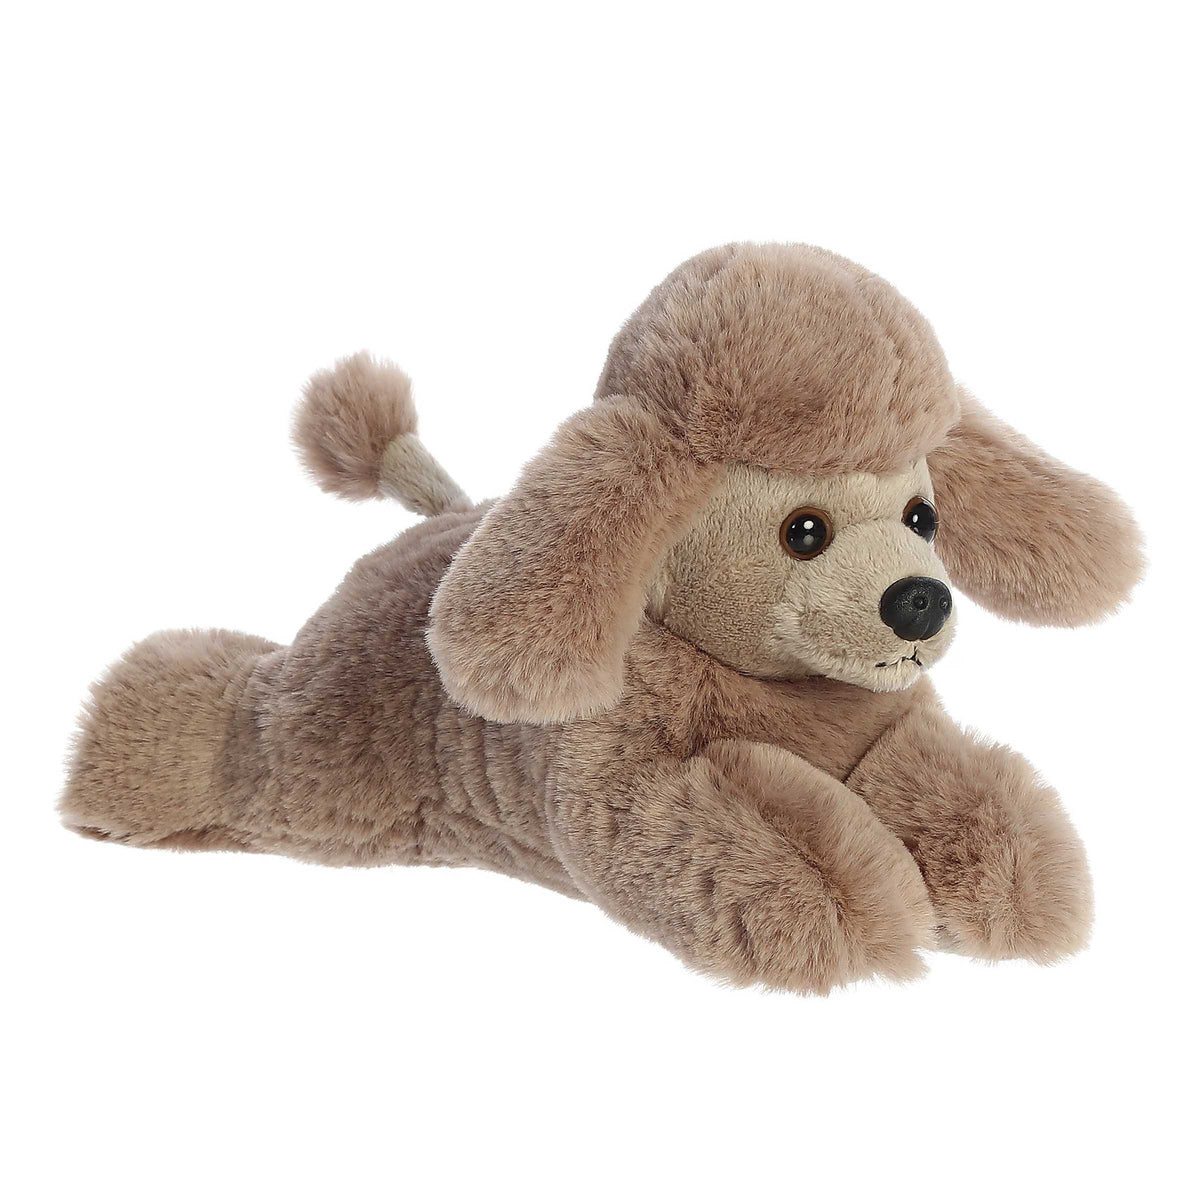 A brown poodle plush from the mini flopsie collection by aurora plush that is laying on its tummy